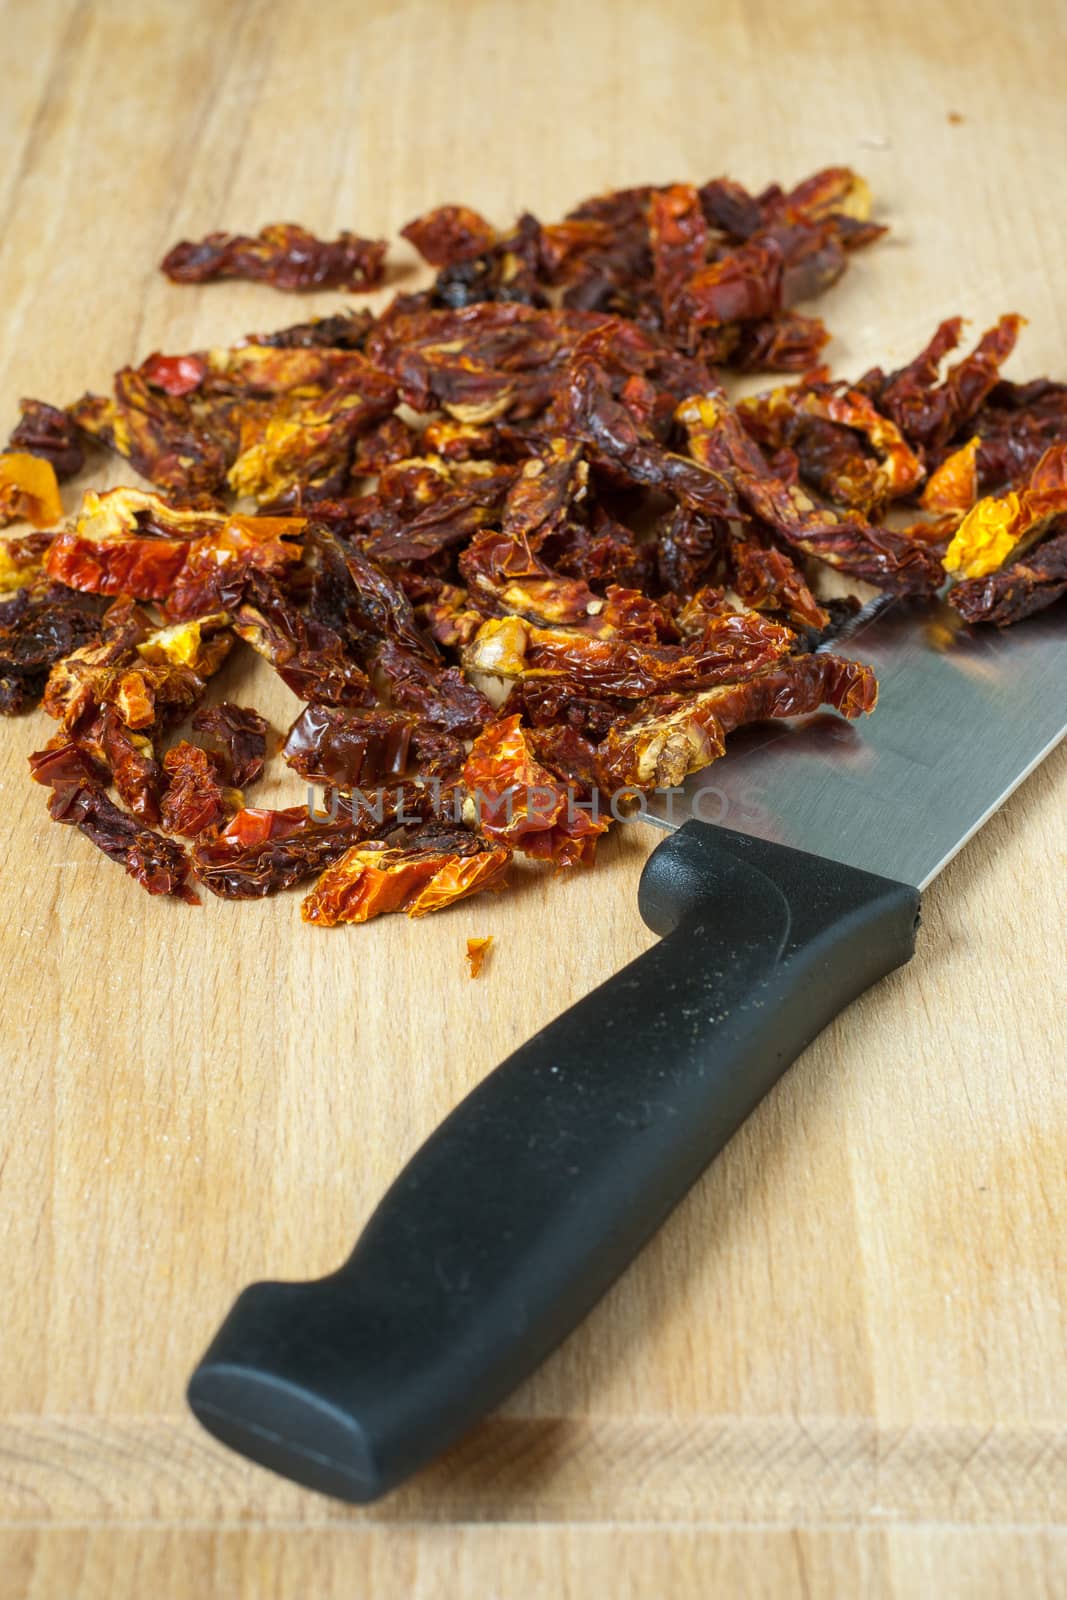 Sun dried tomatoes sliced up on a wooden cutting board.